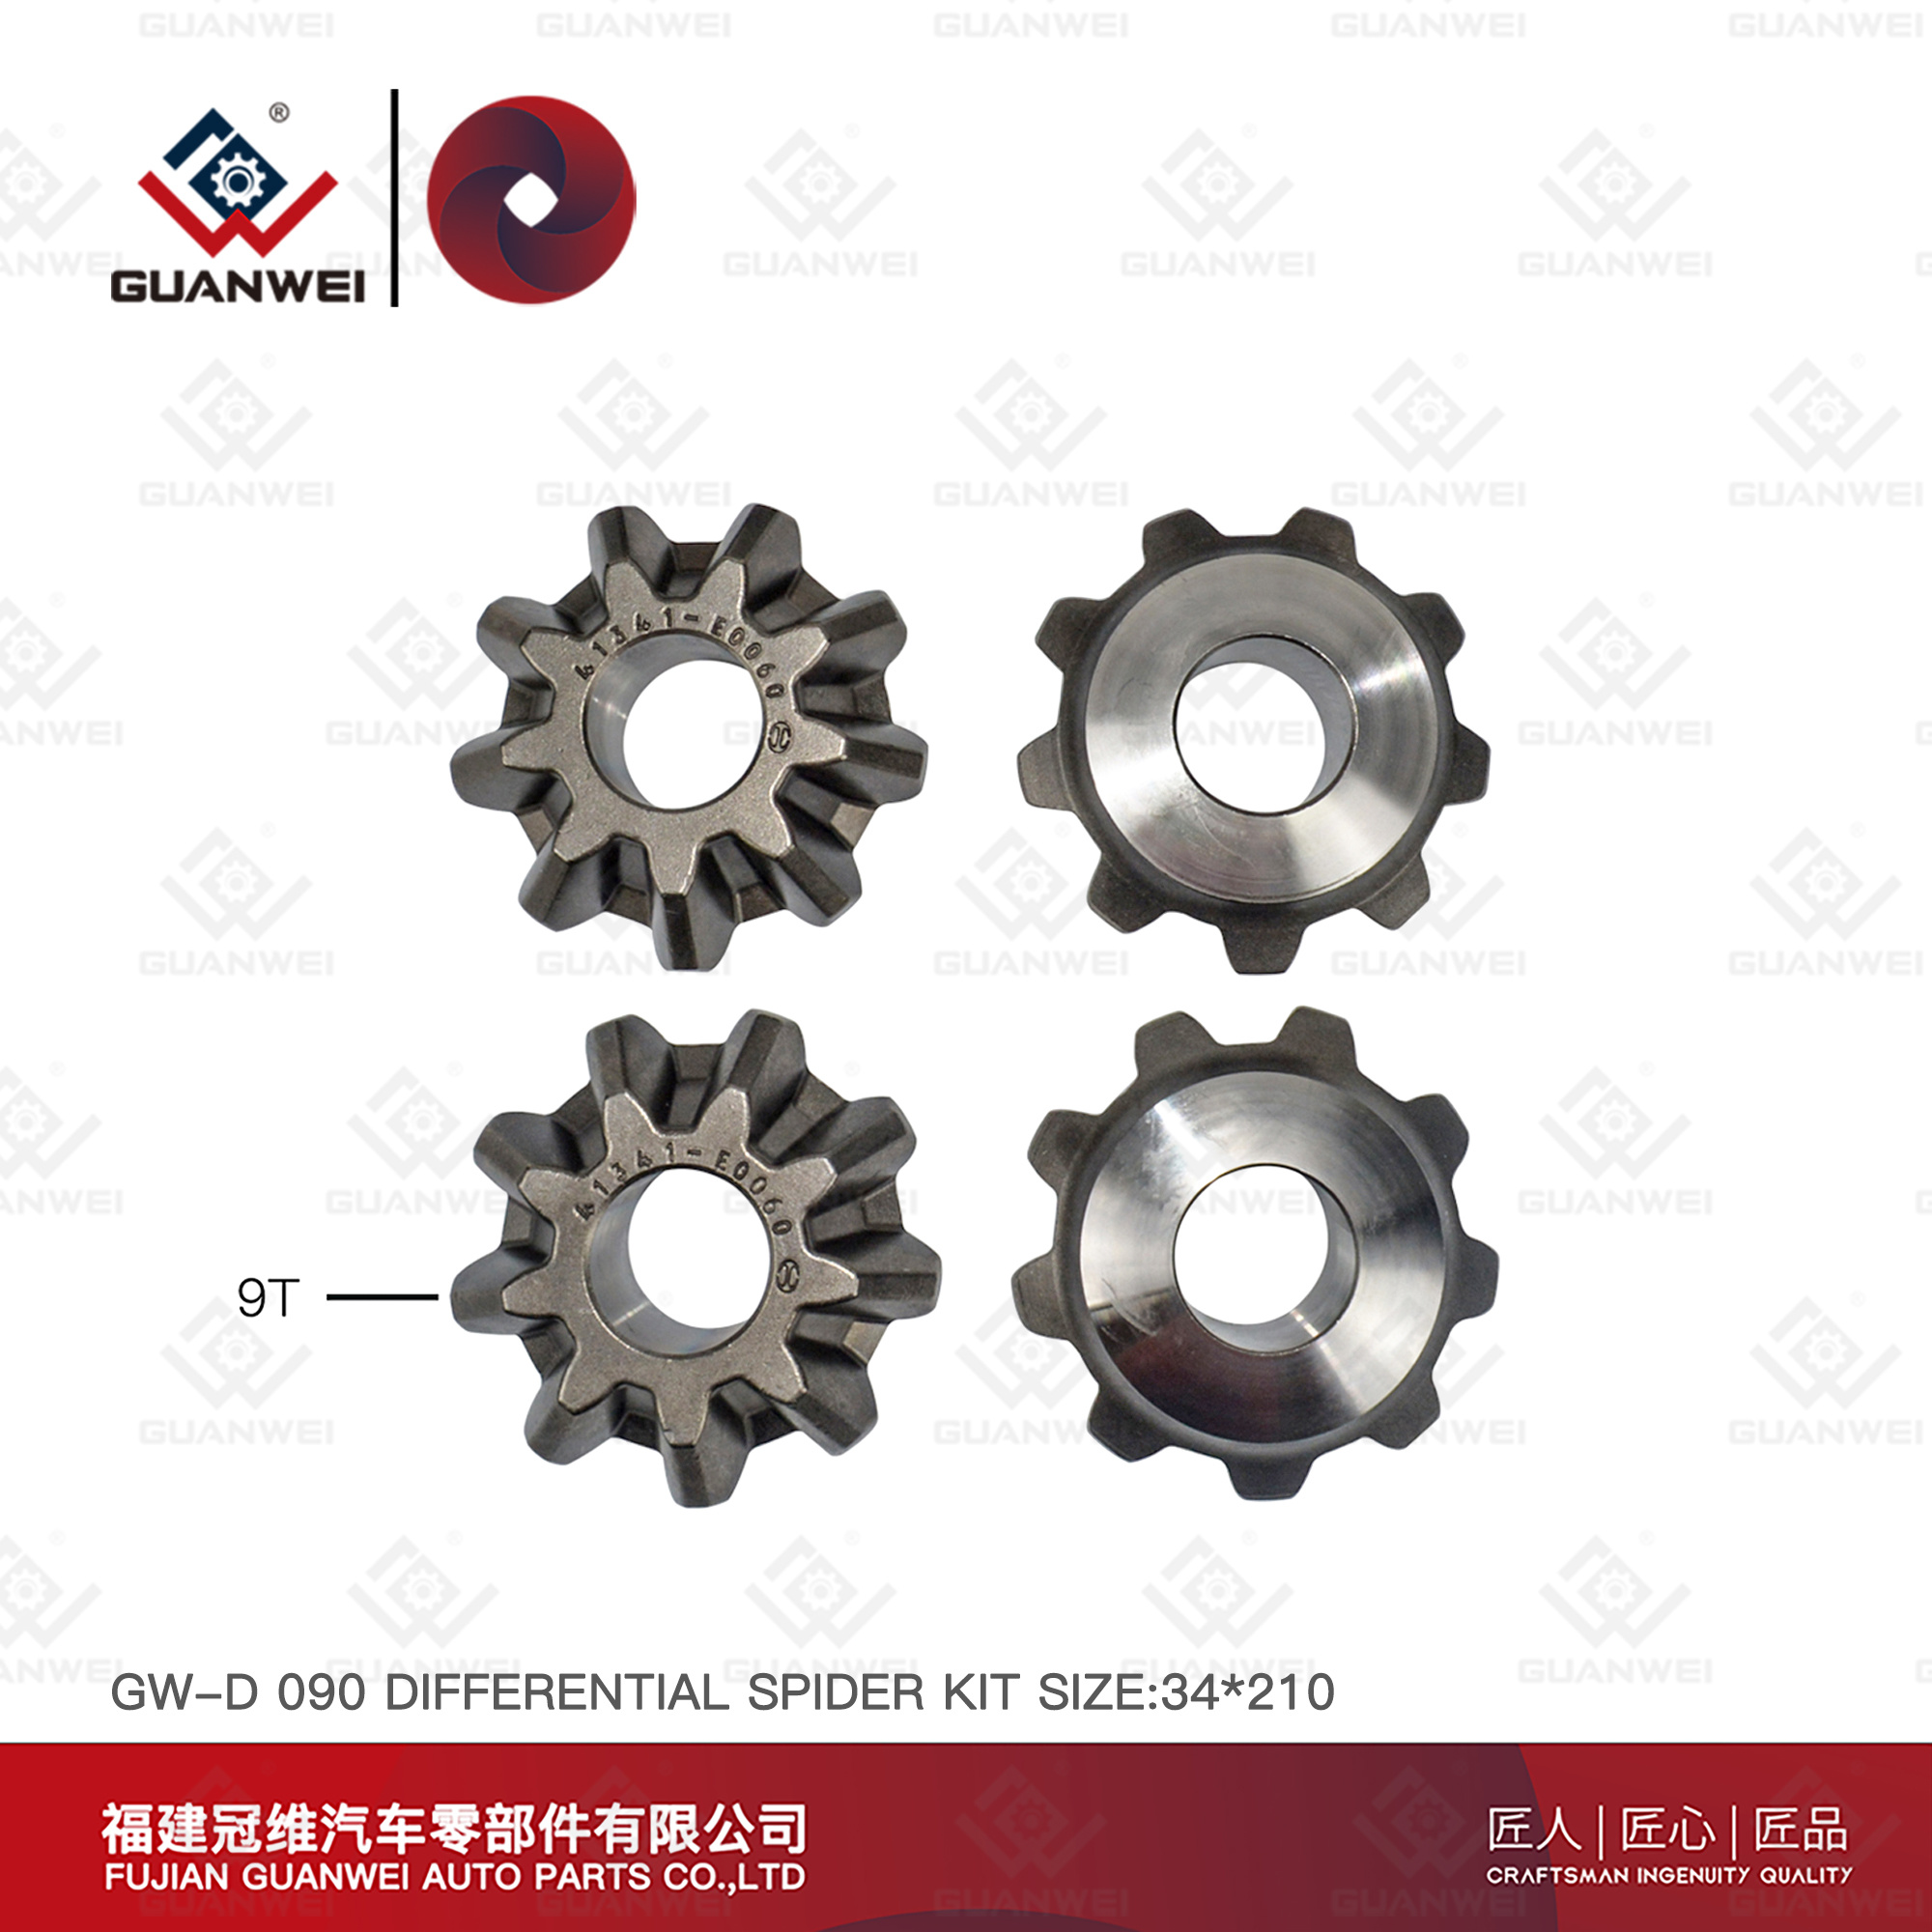 Differential Spider Gear Kit For HINO' LOHAN Oem 41331-E0060